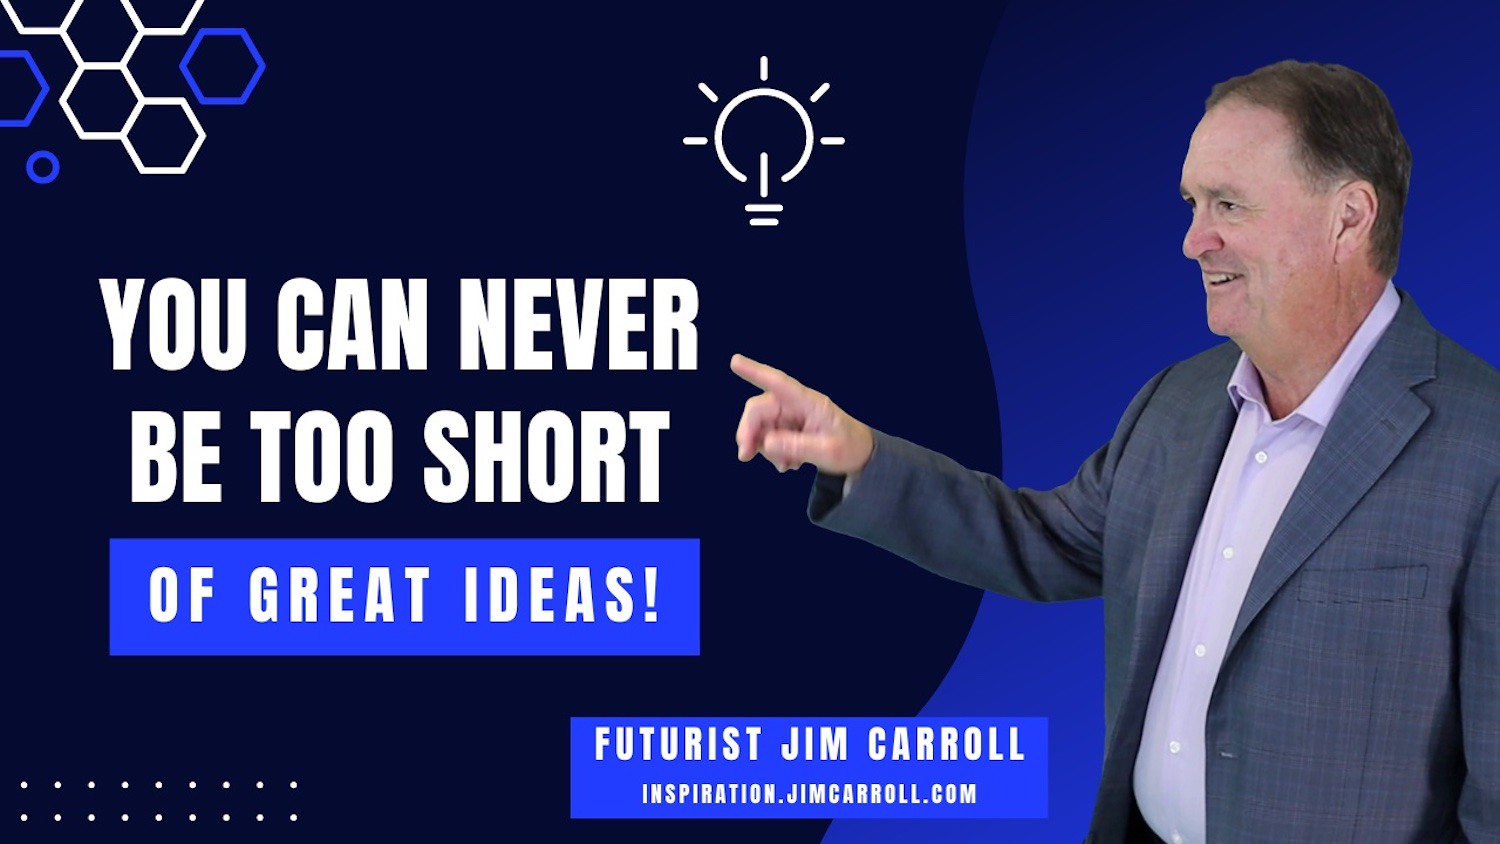 "You can never be too short of great ideas!" - Futurist Jim Carroll